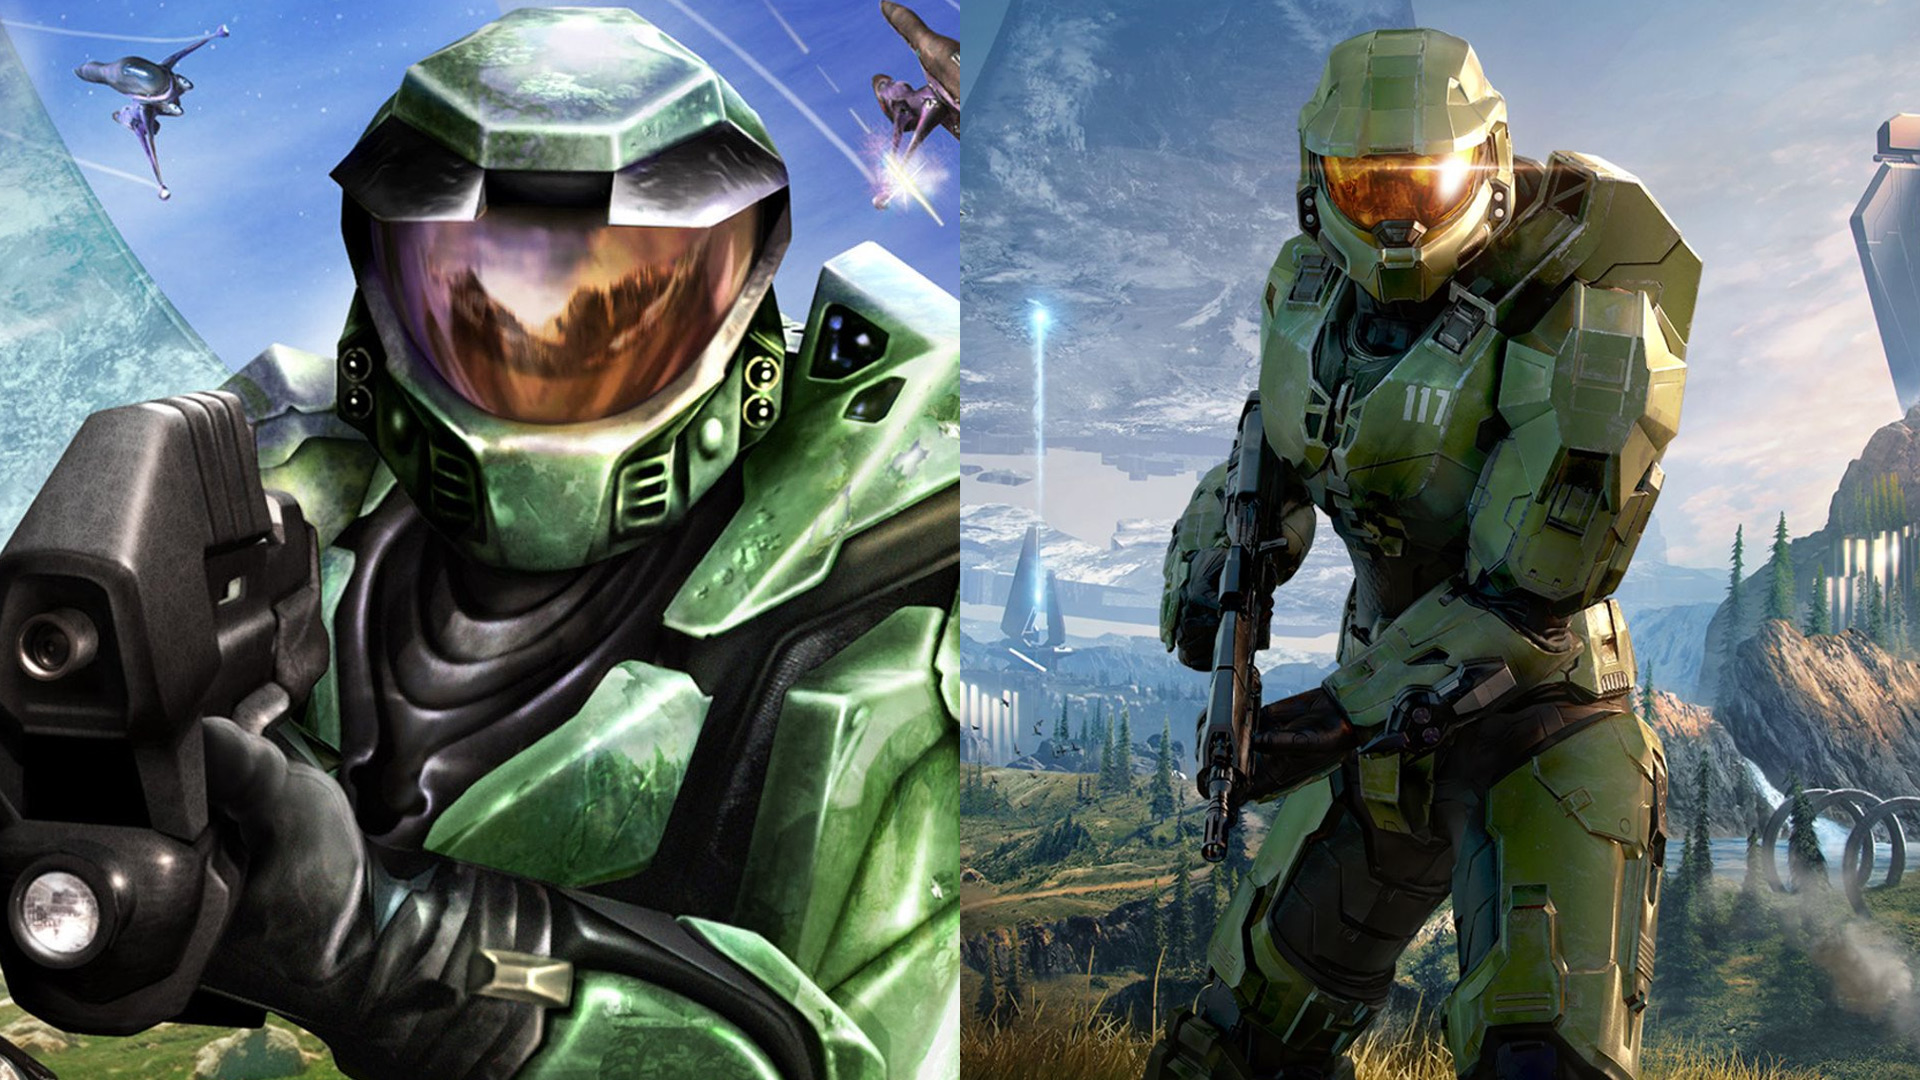 How to Play the Halo Games in Chronological Order - IGN